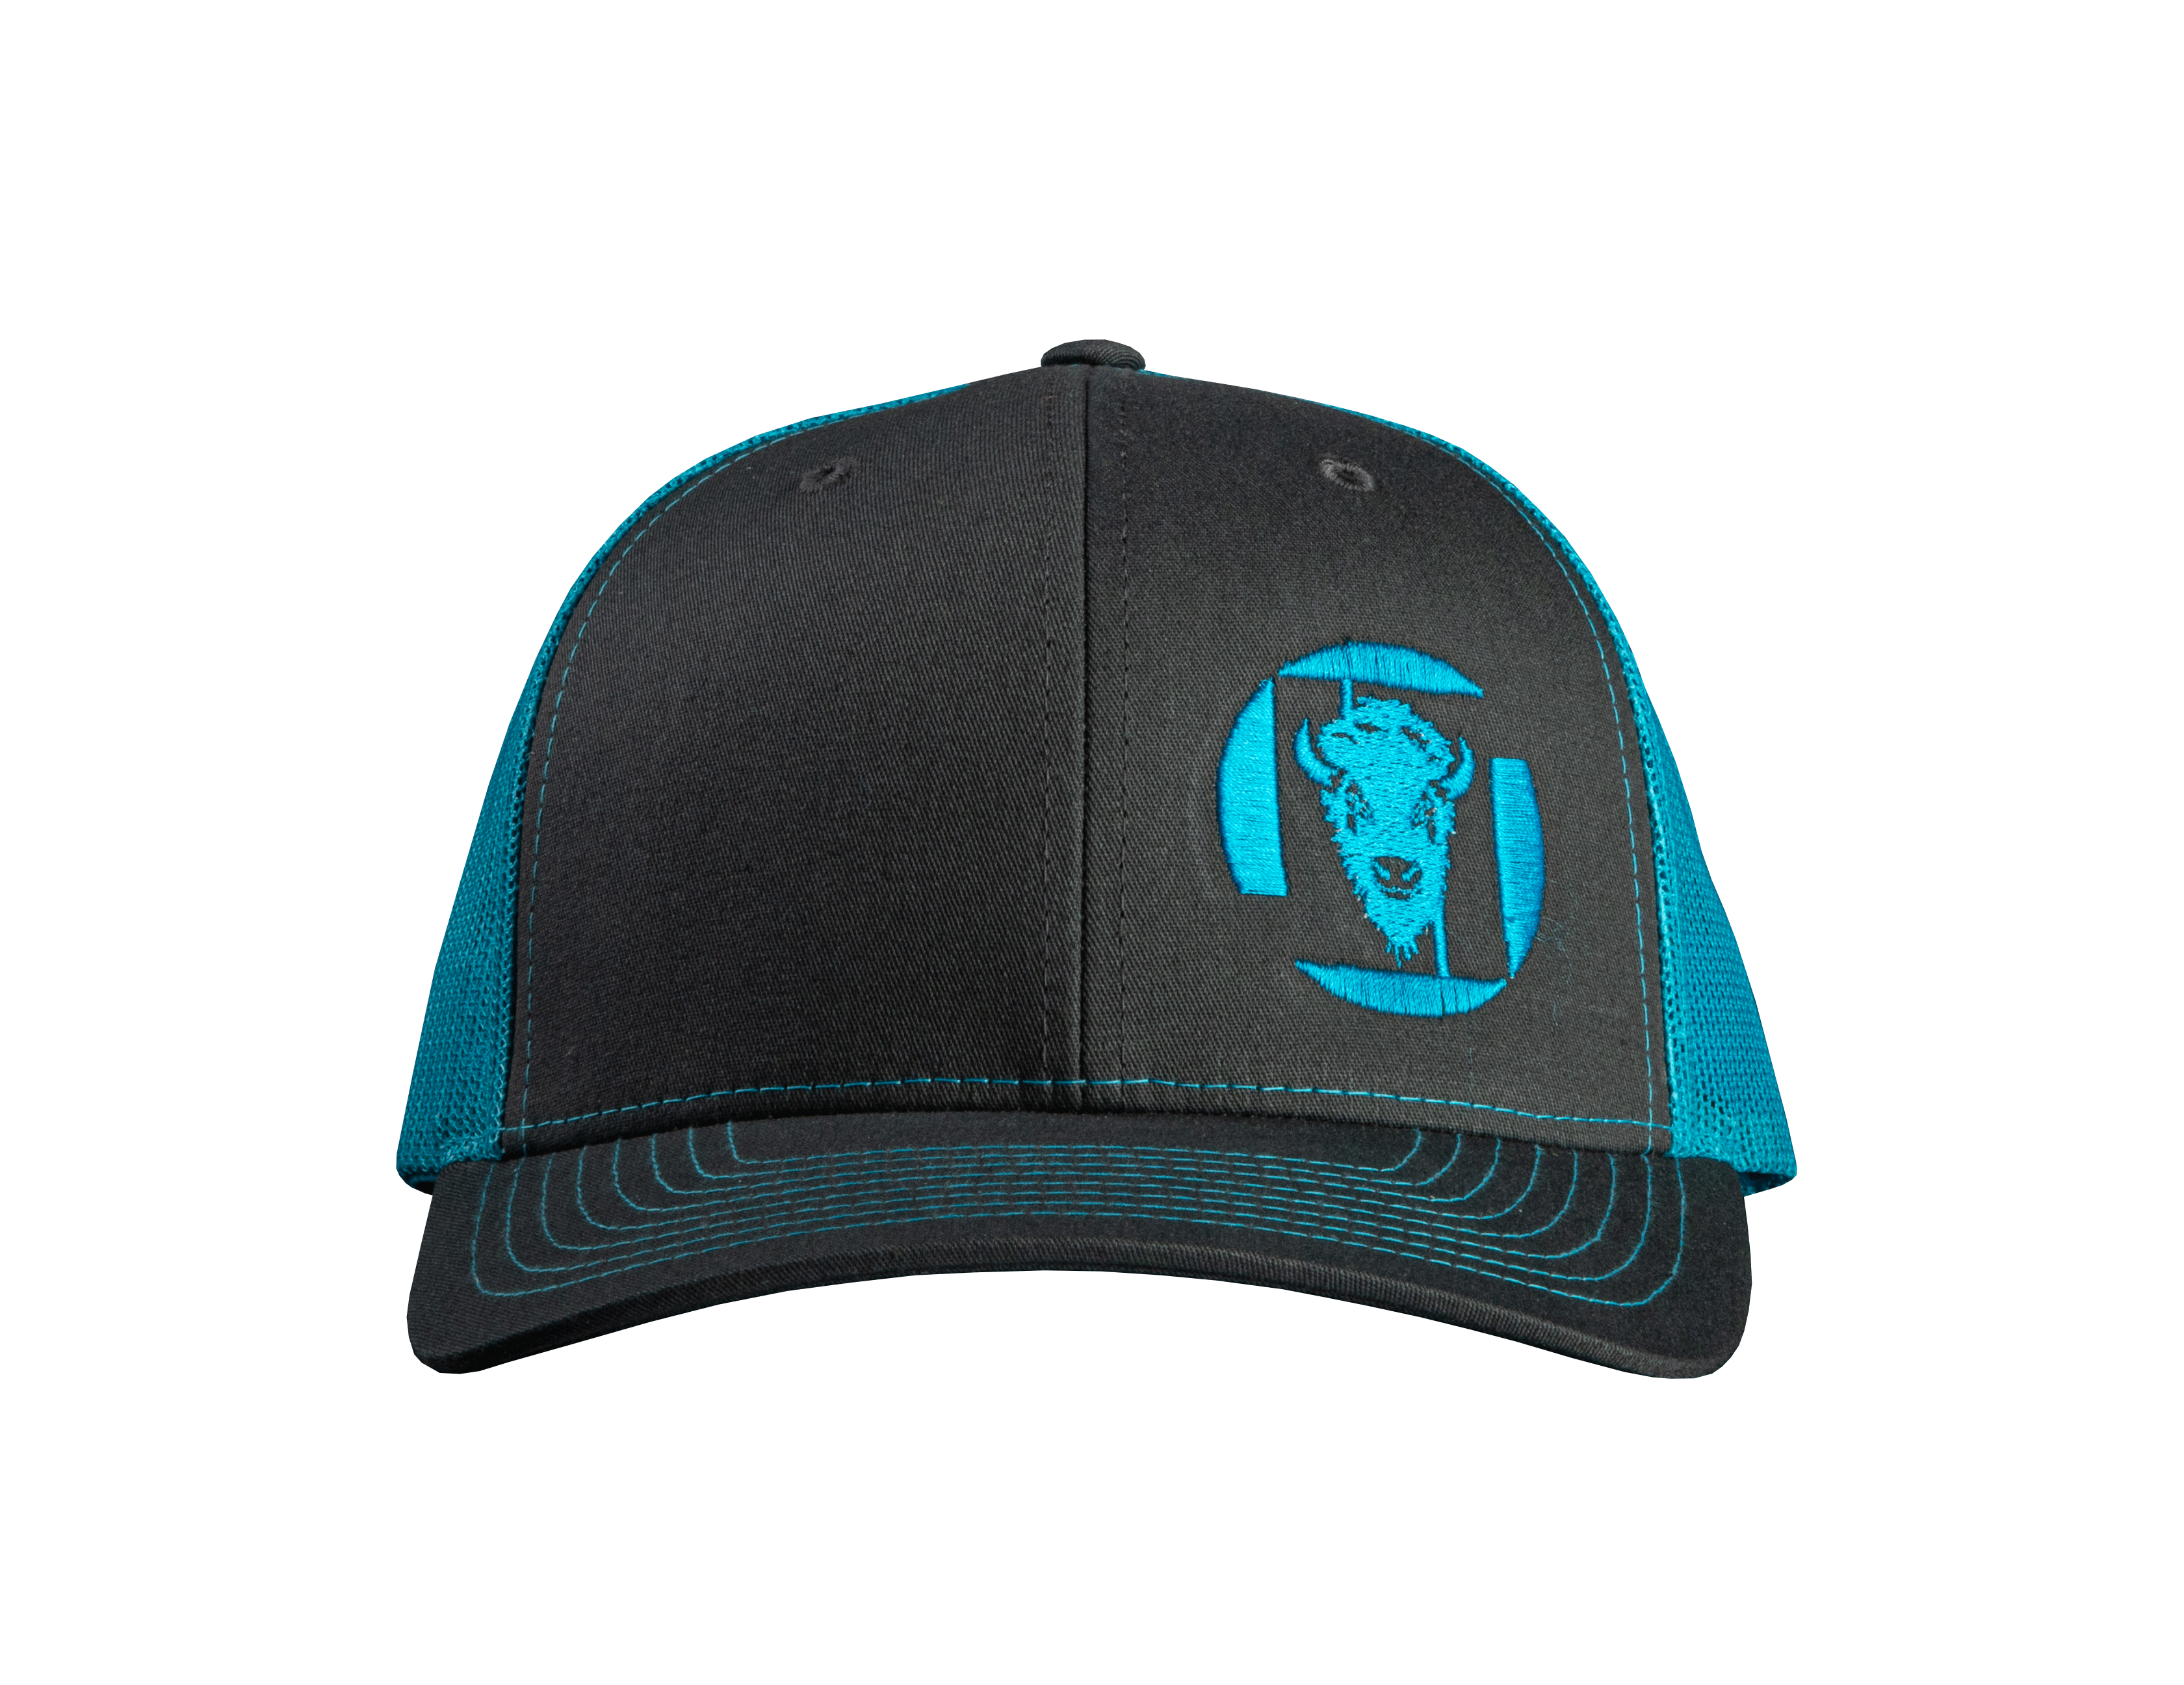 LT Logo Hat Charcoal Crown/Brim with Neon Blue Mesh Back & matching logo embroidery